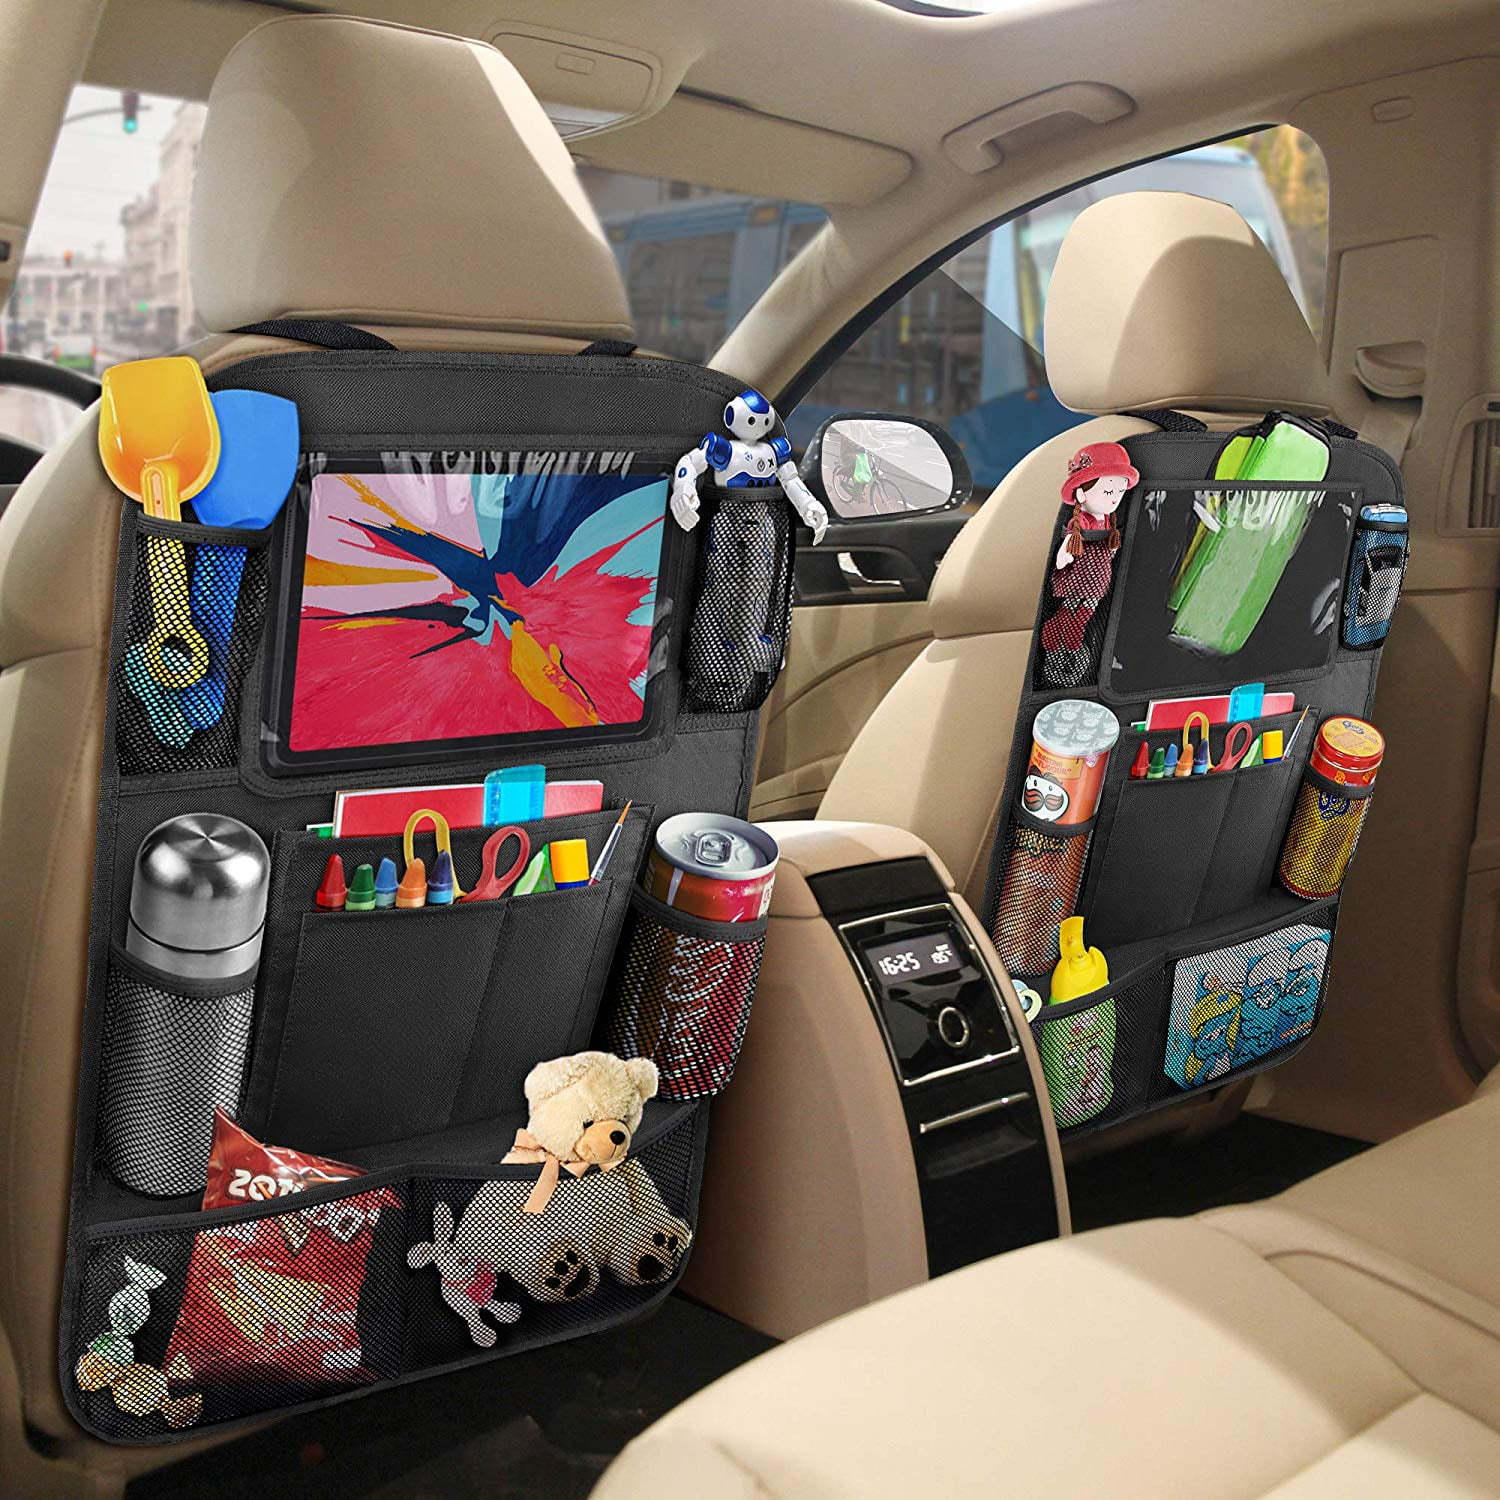 Backseat Organizer with Tablet Holder Storage Pockets for Books Wipes Car Organizer for Kids & Toddlers by Tomash Adjustable Straps for Universal Fit 24x16.5” Insulated Drink Pouches Snacks